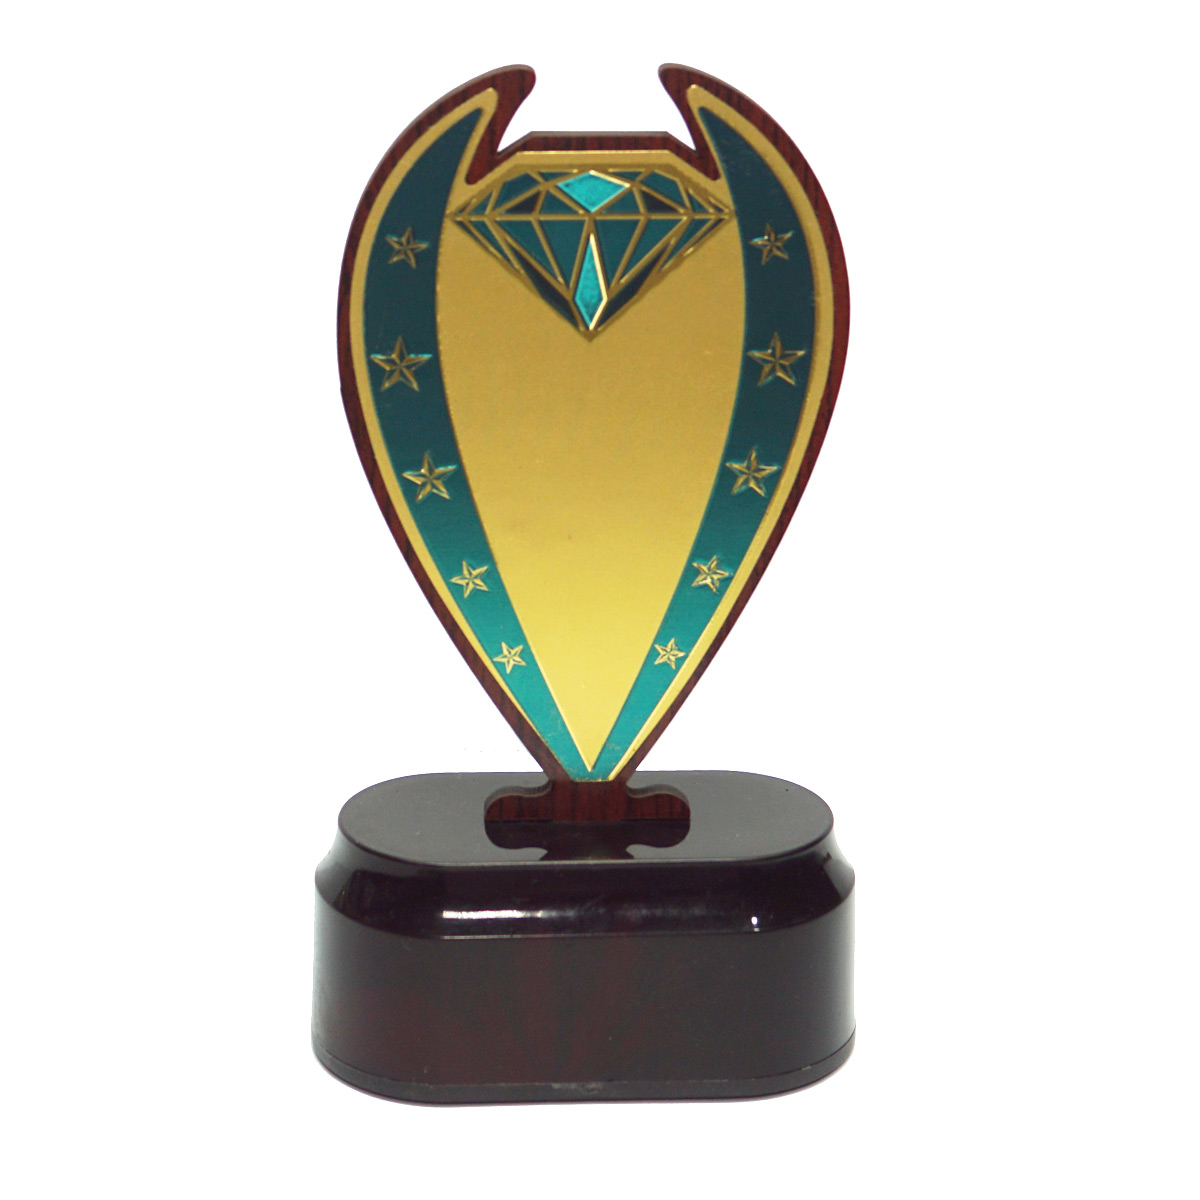 penhouse.in TP1171 Diamond Plate Wooden Trophy 6.75 Inch With Customization SKU TP014